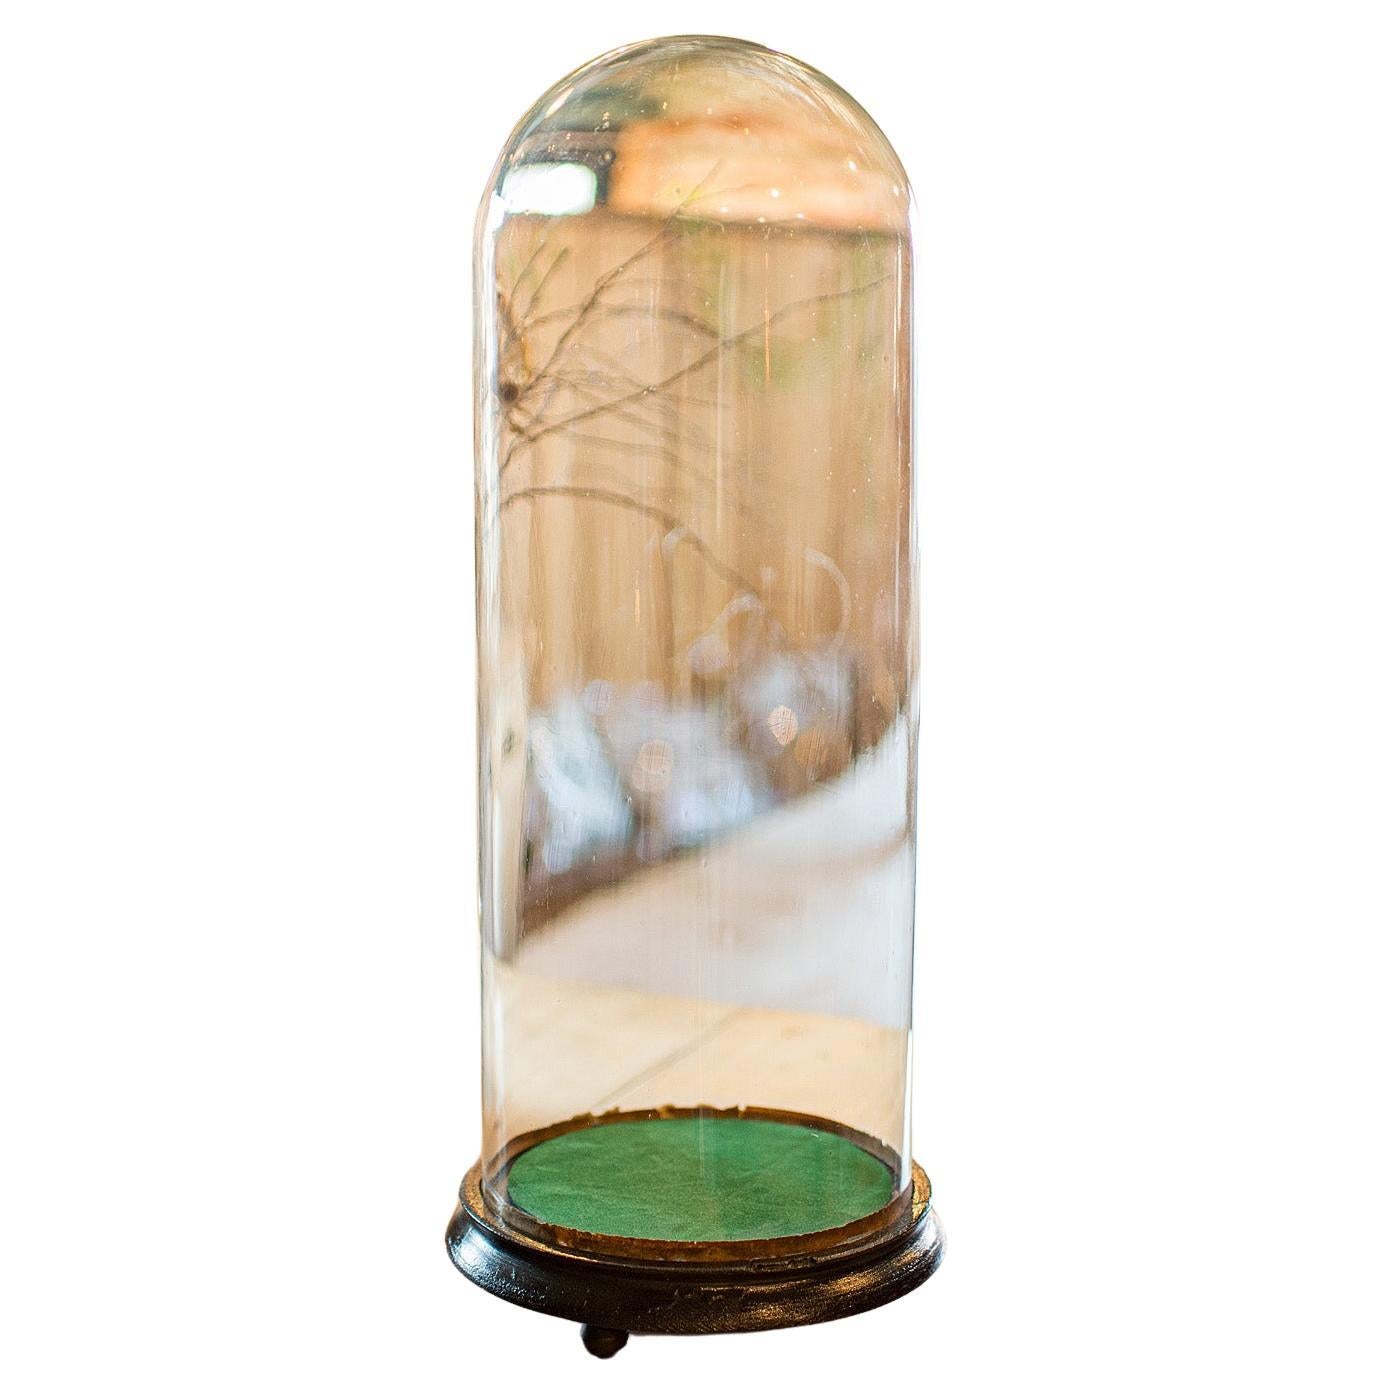 Tall Antique Taxidermy Dome, English, Glass, Pine, Display Case, Victorian, 1880